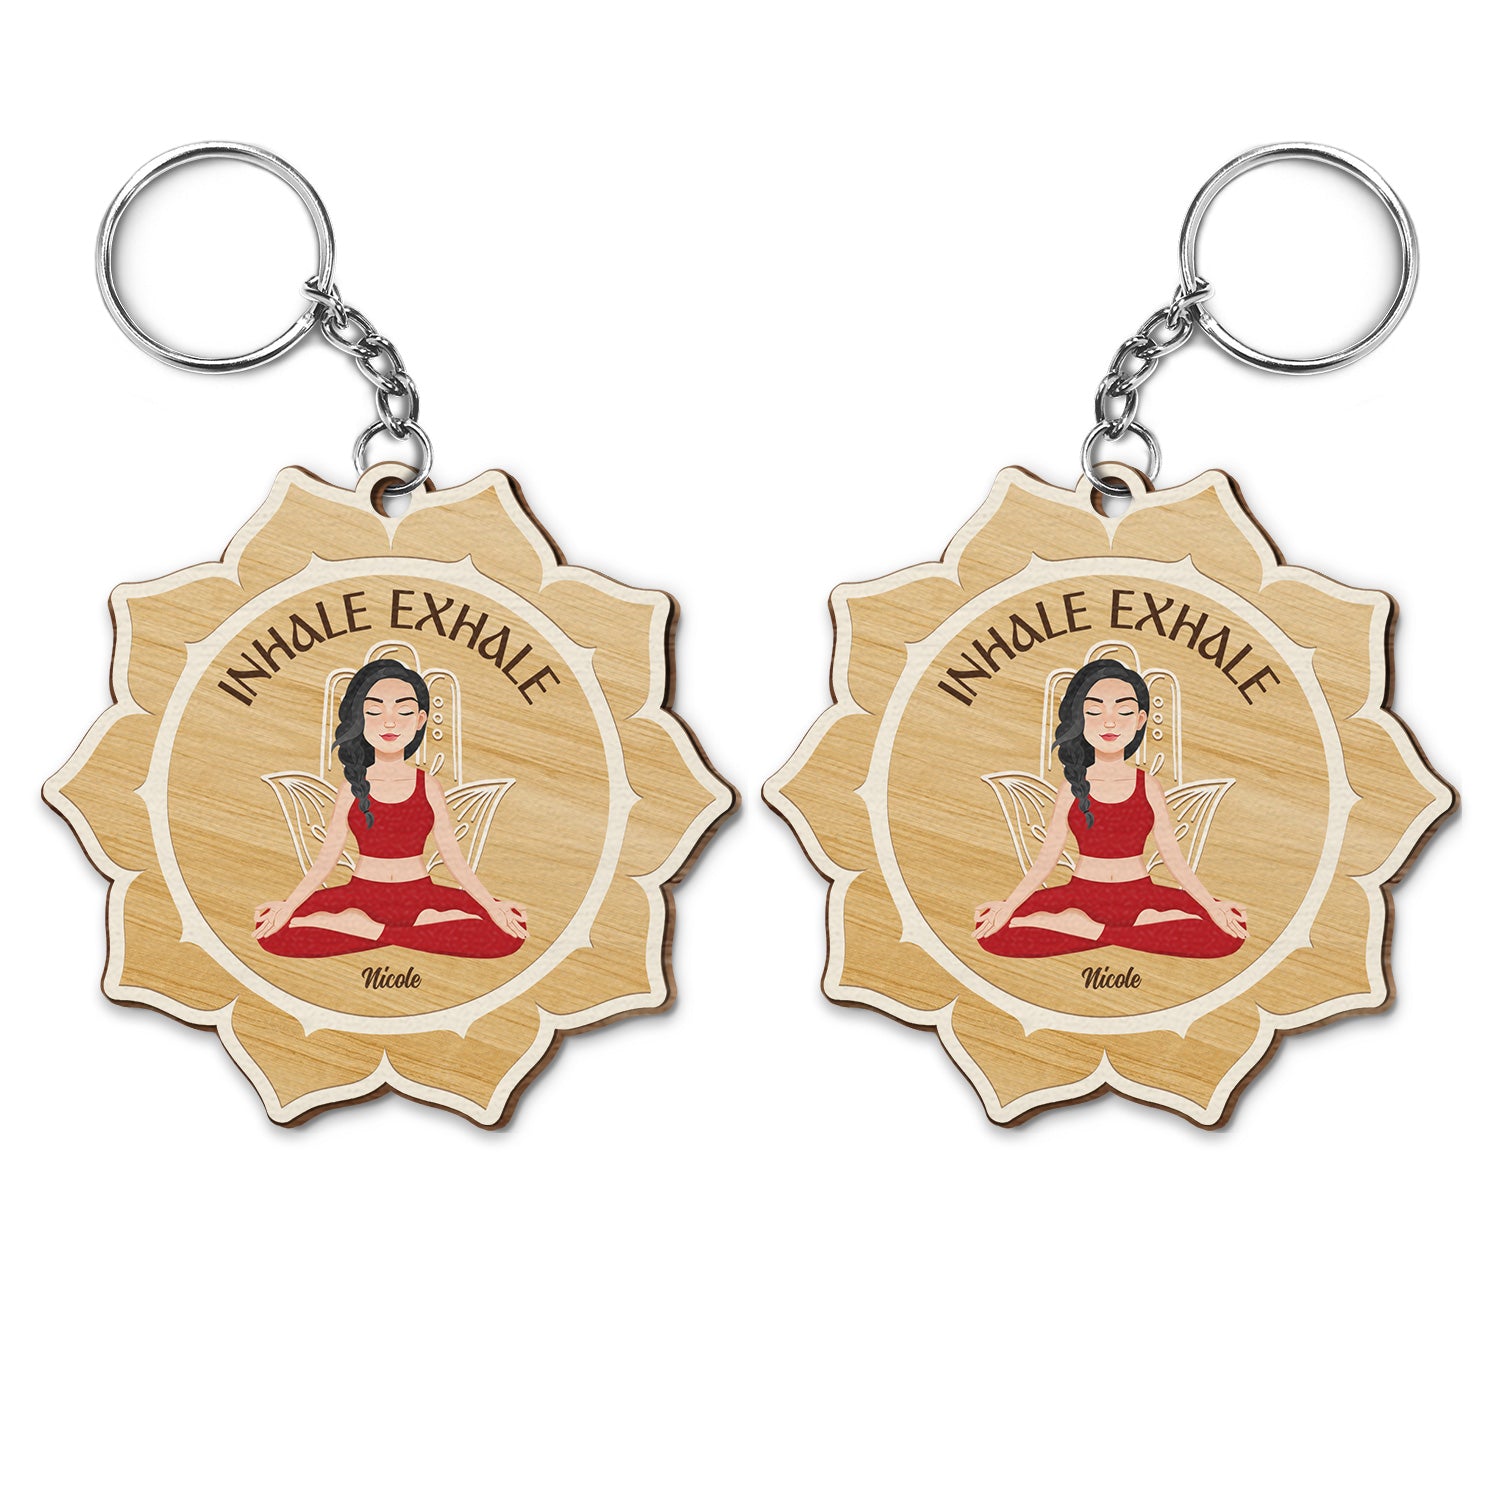 Inhale Exhale - Gift For Yoga Lovers - Personalized Wooden Keychain